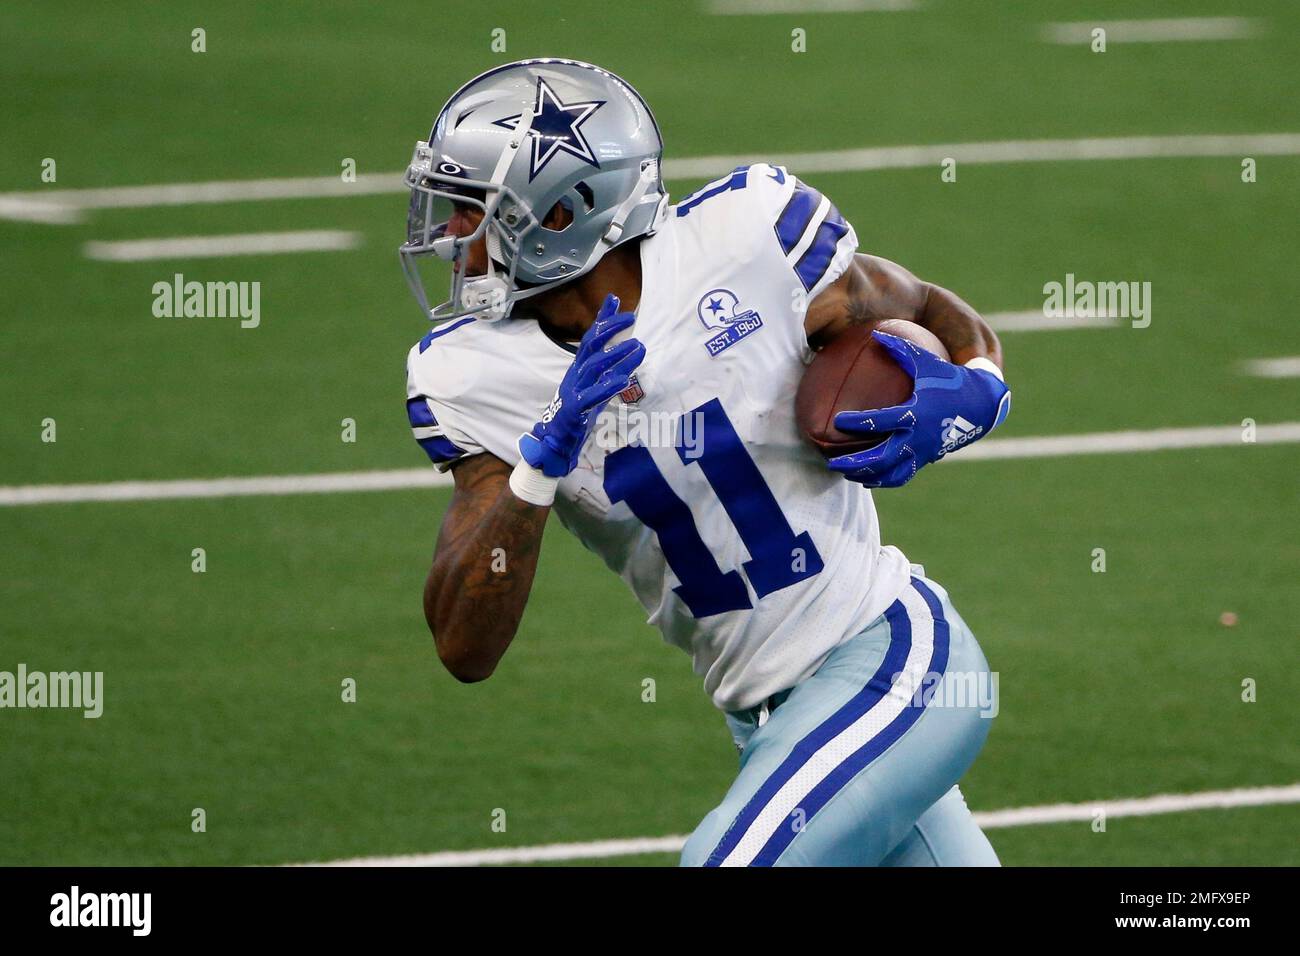 Dallas Cowboys wide receiver Cedrick Wilson (11) gains first down yardage  after catching a pass in the first half of an NFL football game against the  New York Giants in Arlington, Texas,